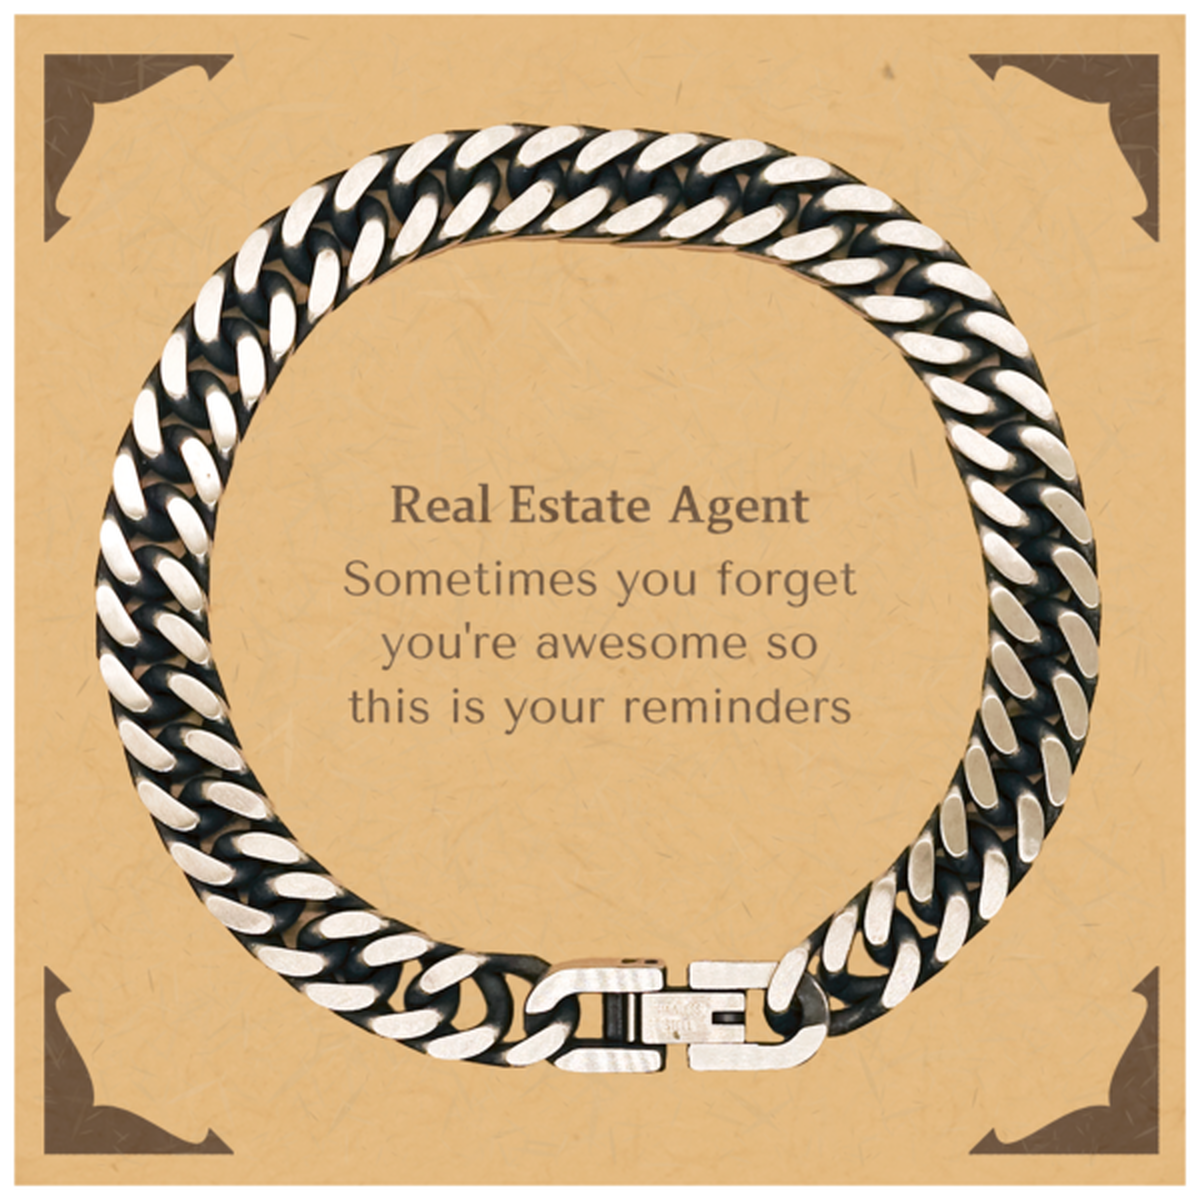 Sentimental Real Estate Agent Cuban Link Chain Bracelet, Real Estate Agent Sometimes you forget you're awesome so this is your reminders, Graduation Christmas Birthday Gifts for Real Estate Agent, Men, Women, Coworkers